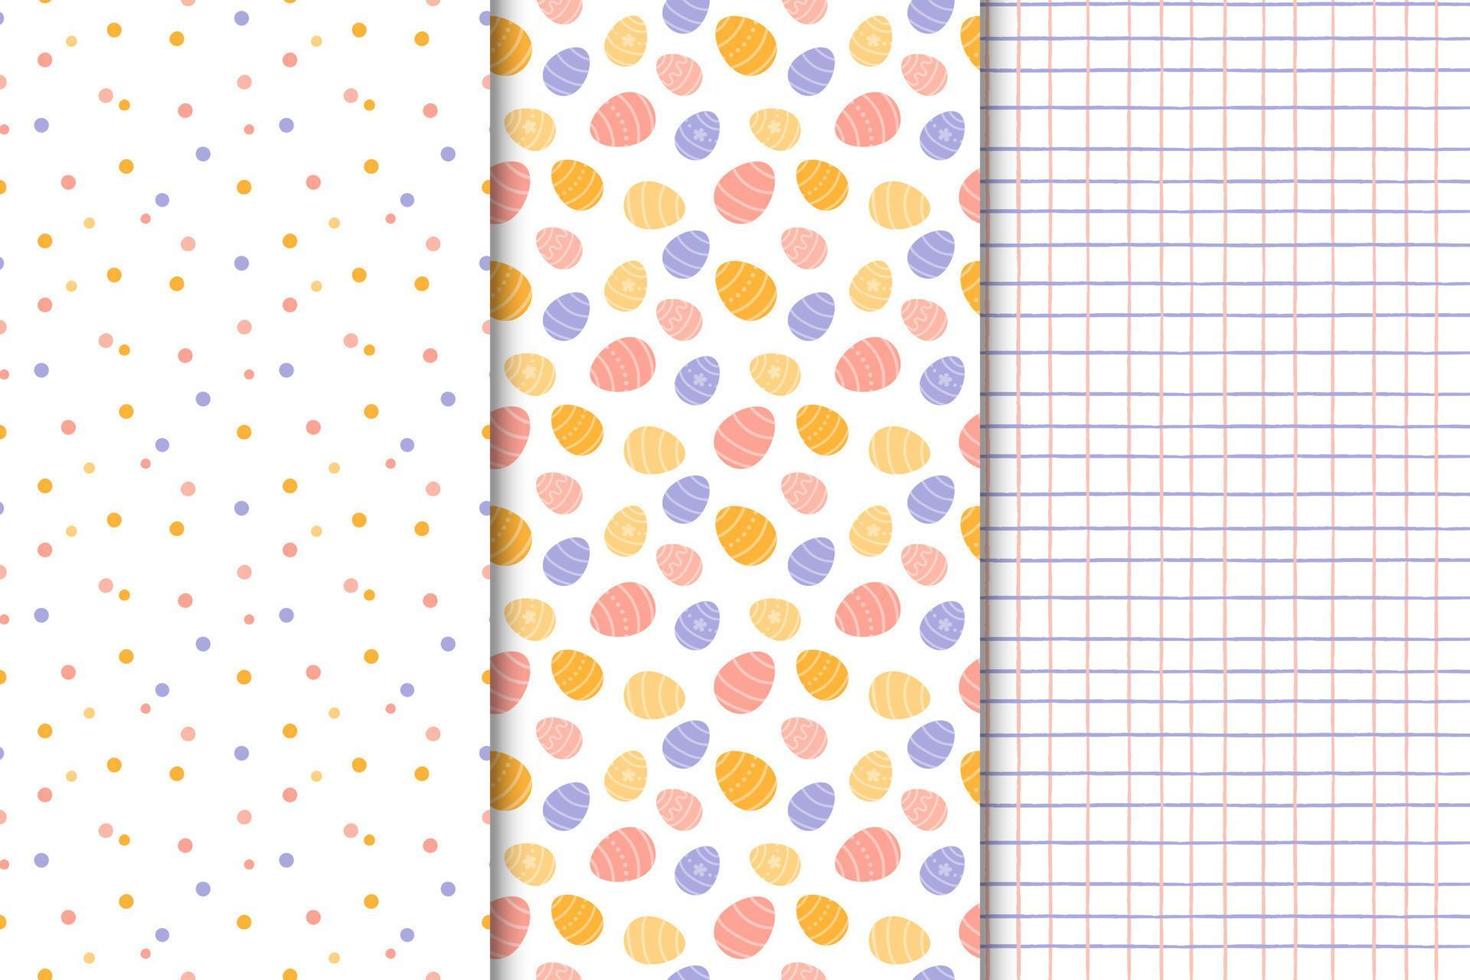 Set of Easter patterns. Easter eggs with different patterns, checkered background, polka dot background. Vector illustration isolated on white background.